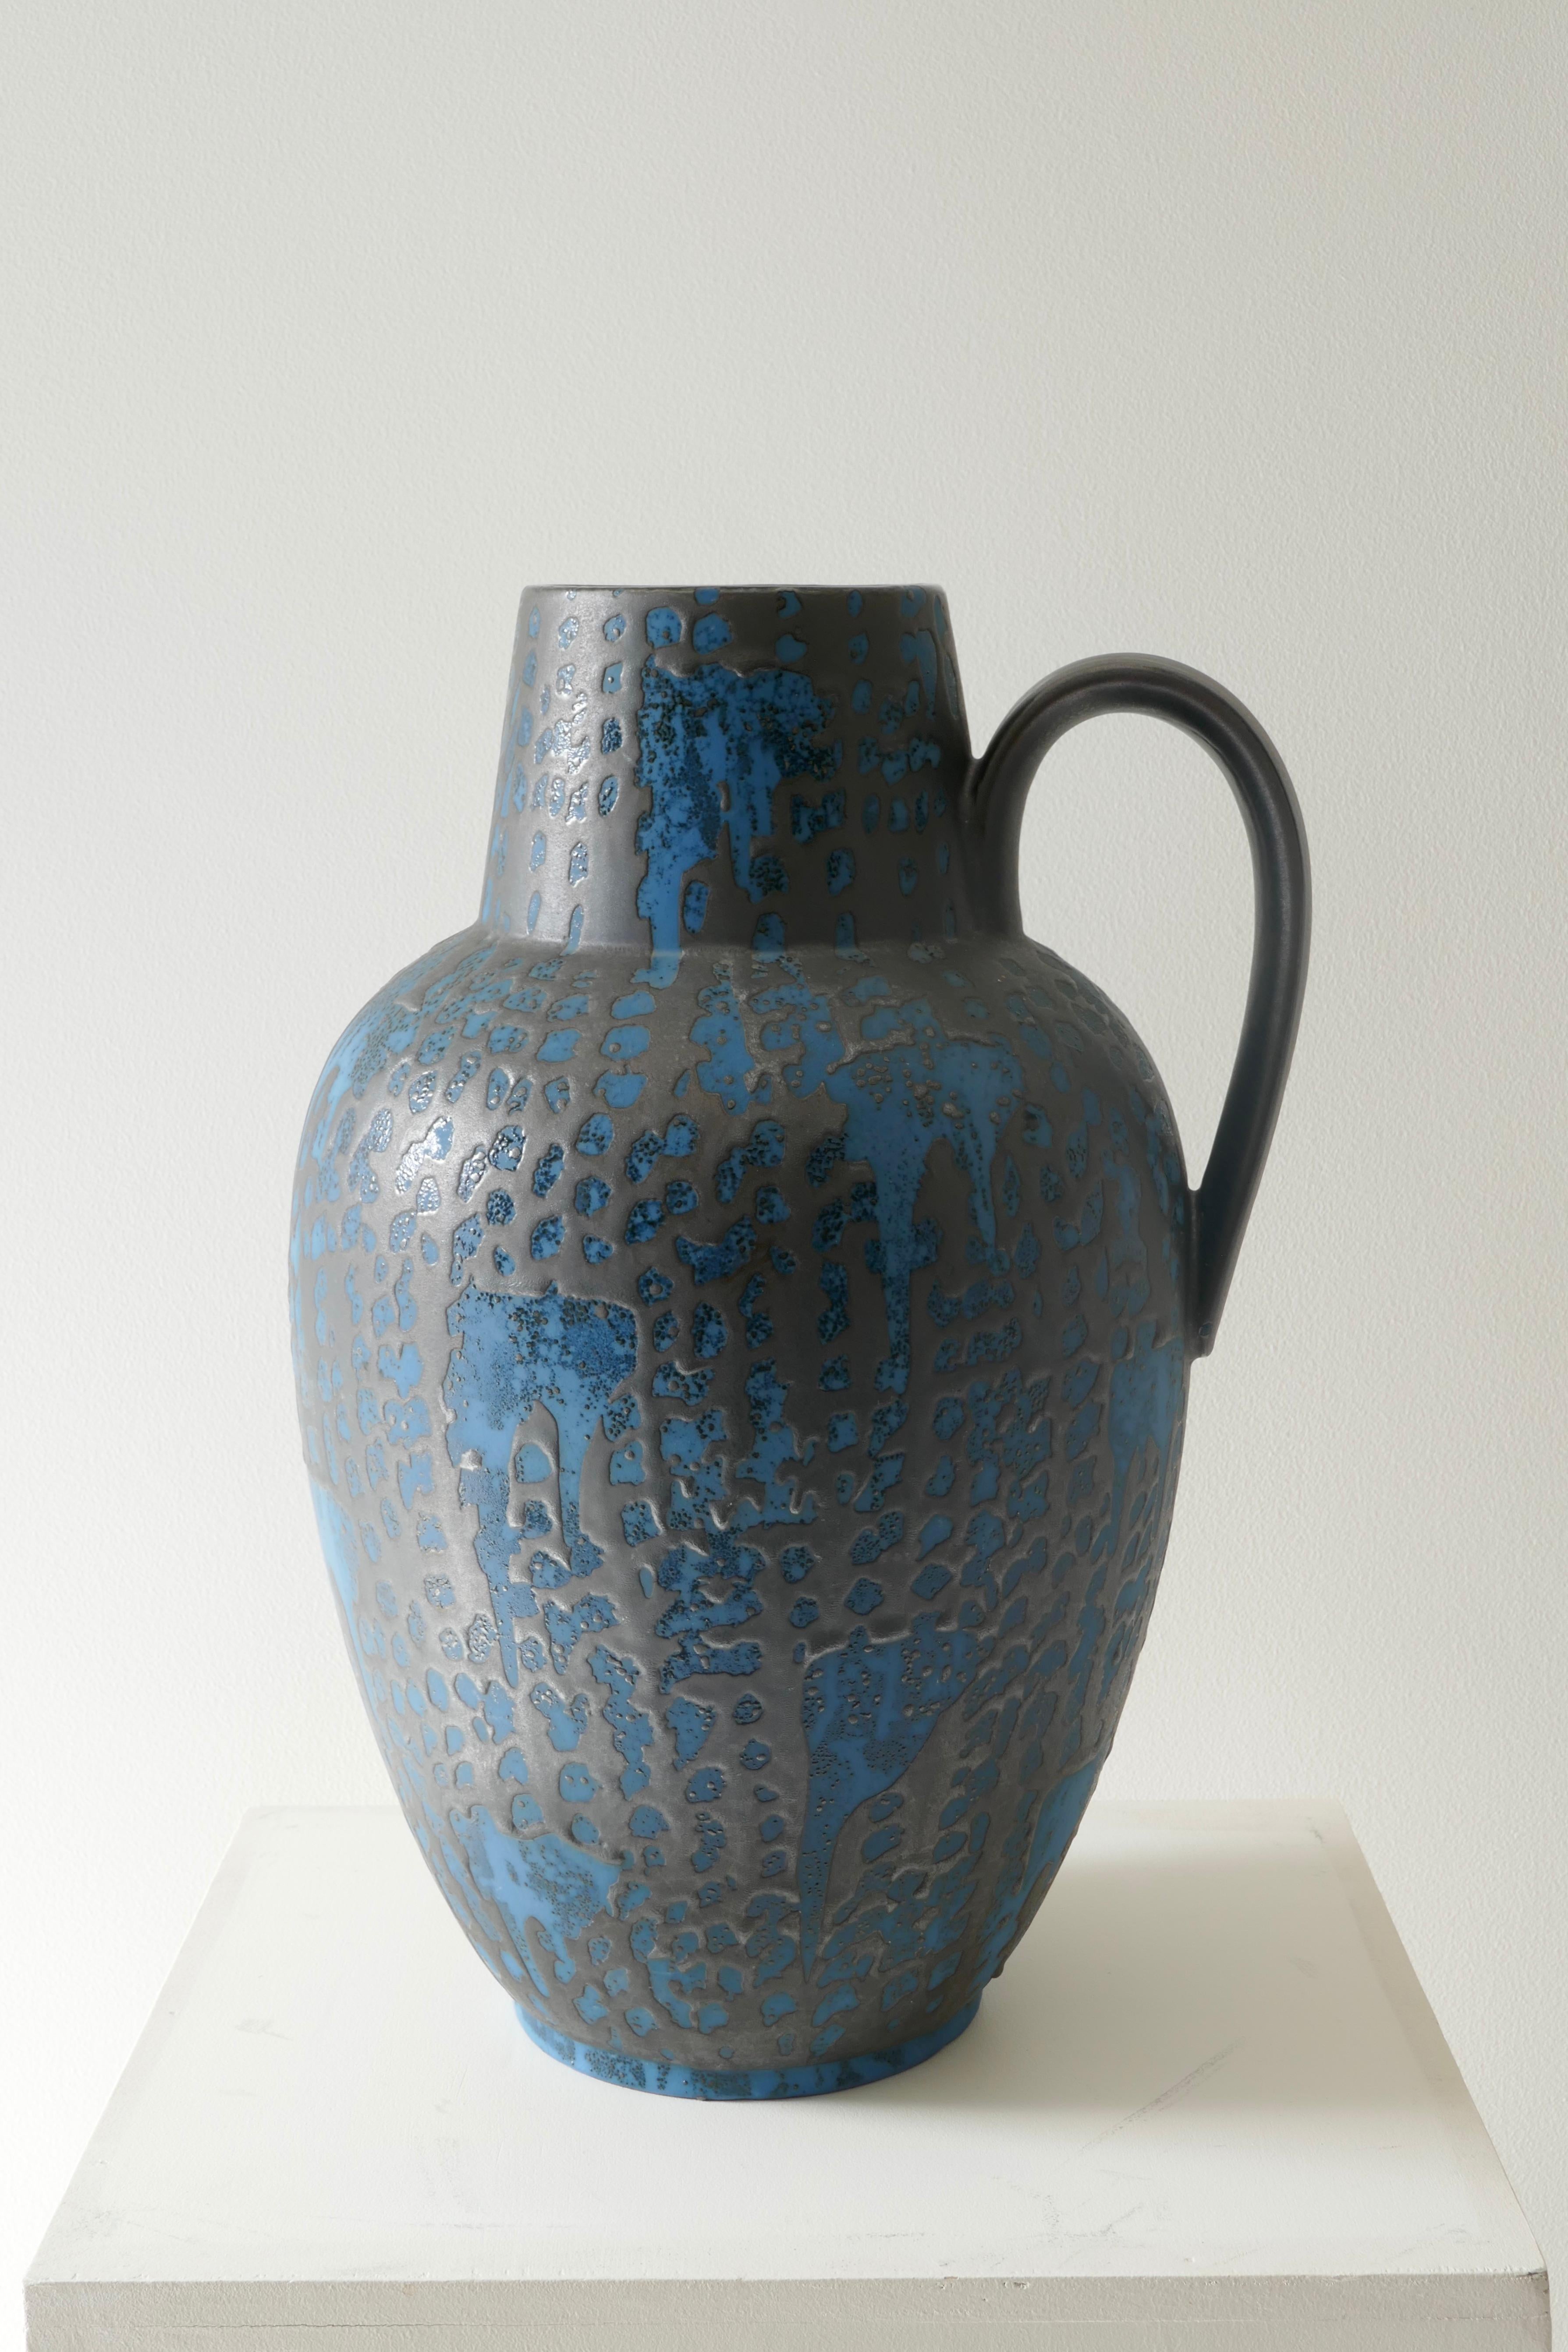 A stunning vase attributed to Carstens and produced in West Germany in the 1970's.
The Carstens Tonnieshof factory was located in Freden an der Leine (West Germany) after they had lost most of their factories to the DDR.

A teal blue base mixed